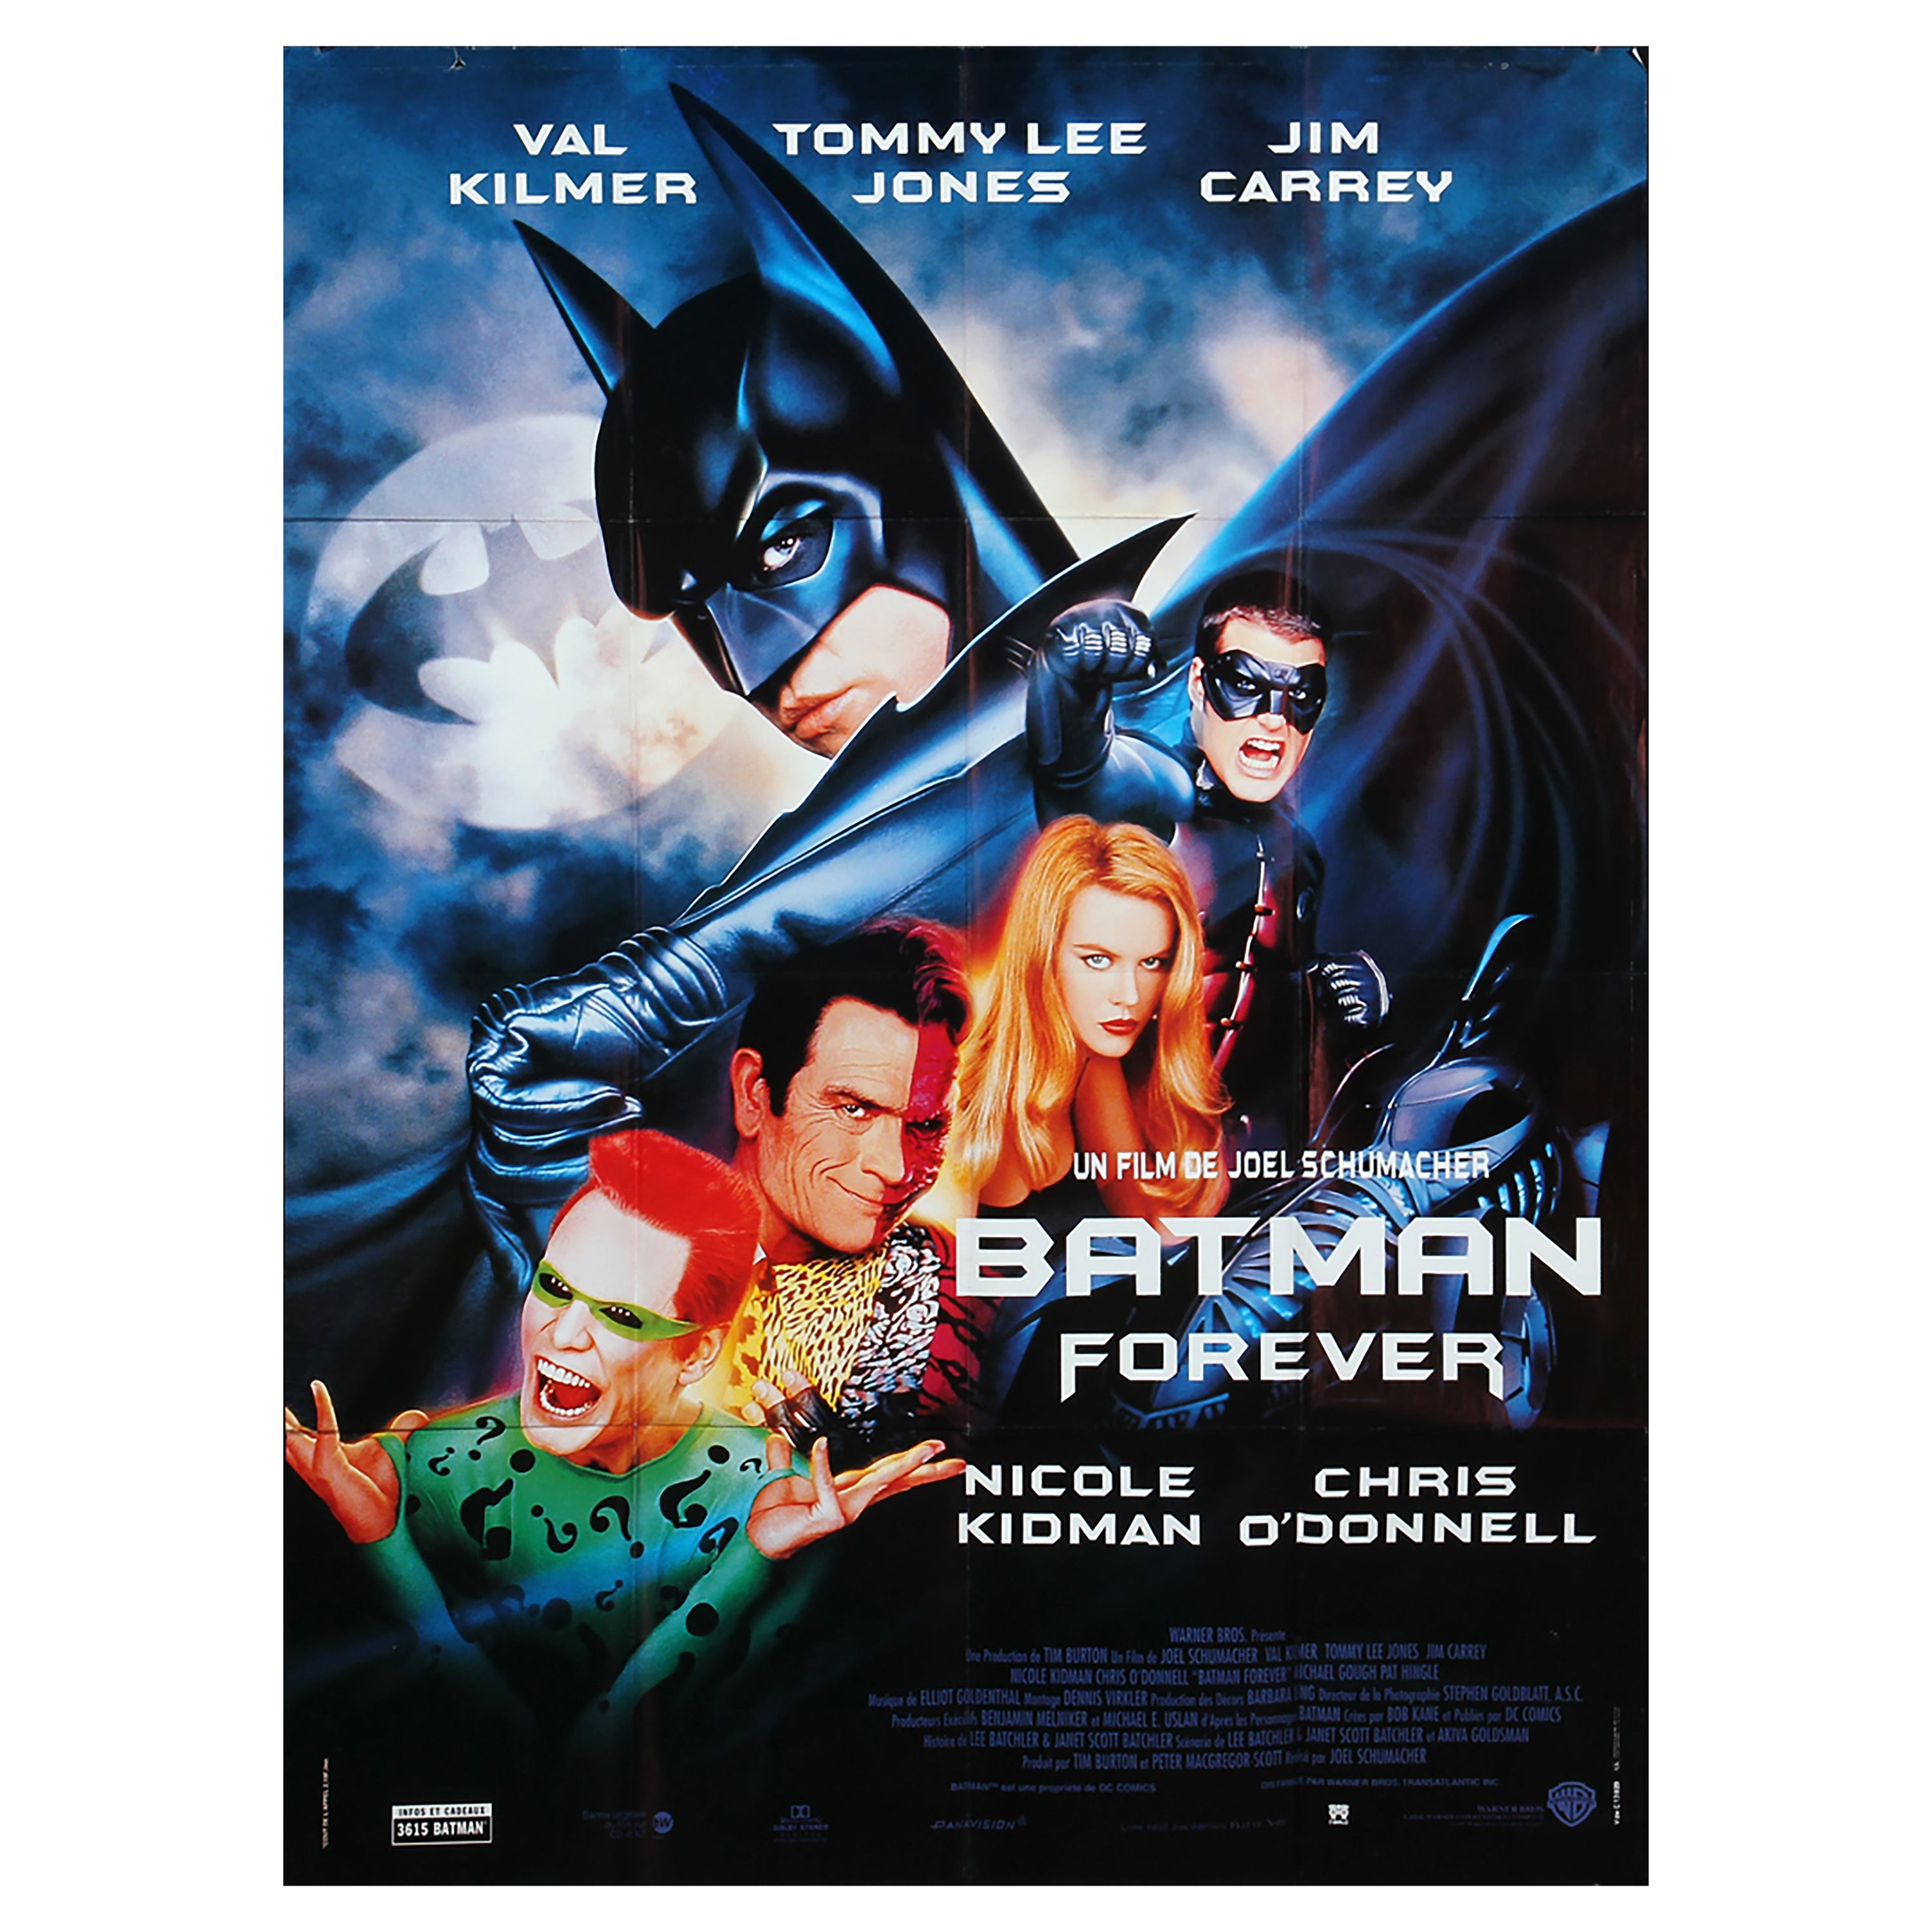 Film Poster "Batman Forever" from 1995 For Sale at 1stDibs